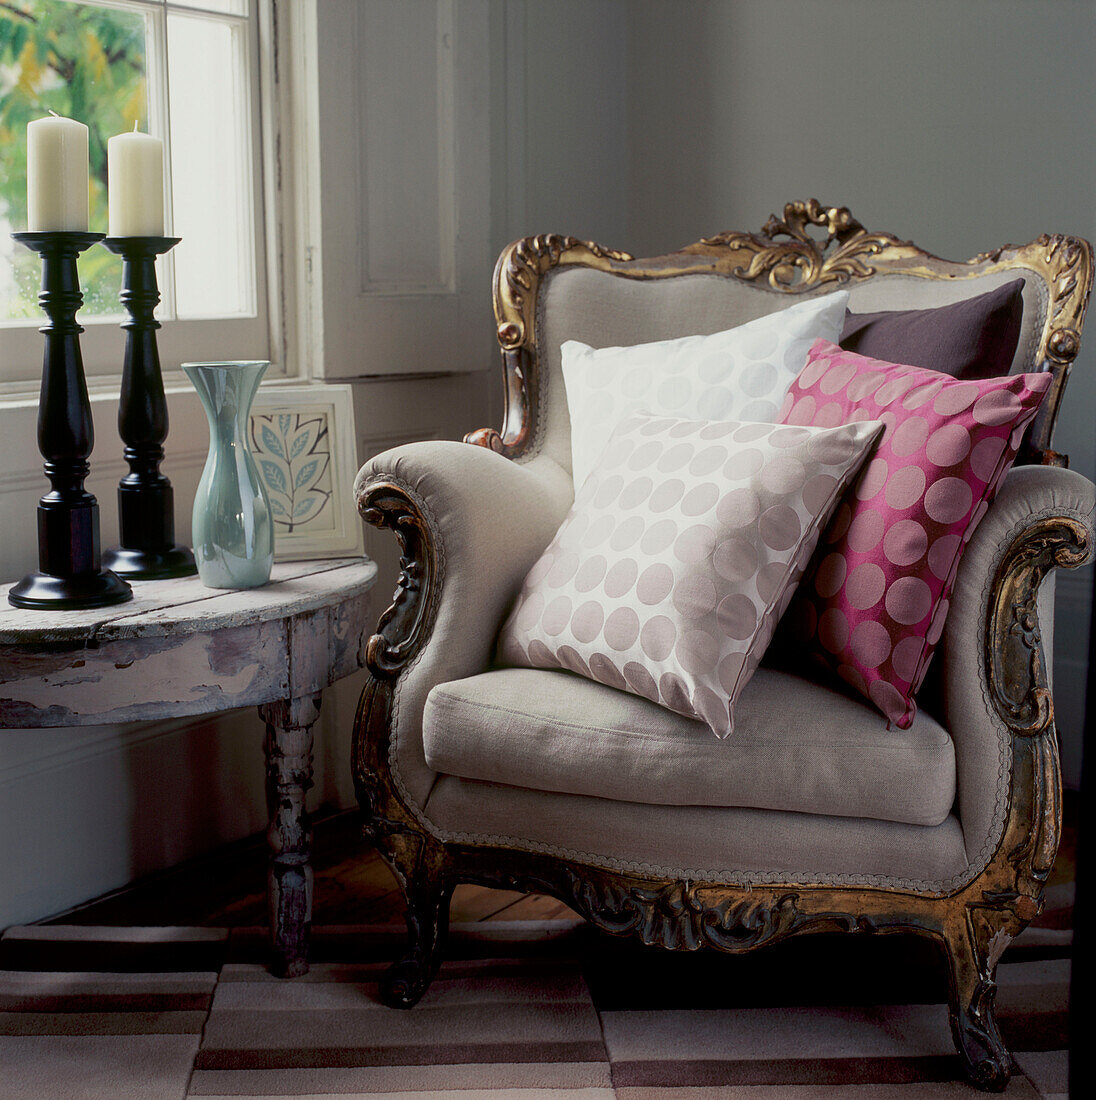 Decorative upholstered armchair nest to a window in a corner of a living room with cushions